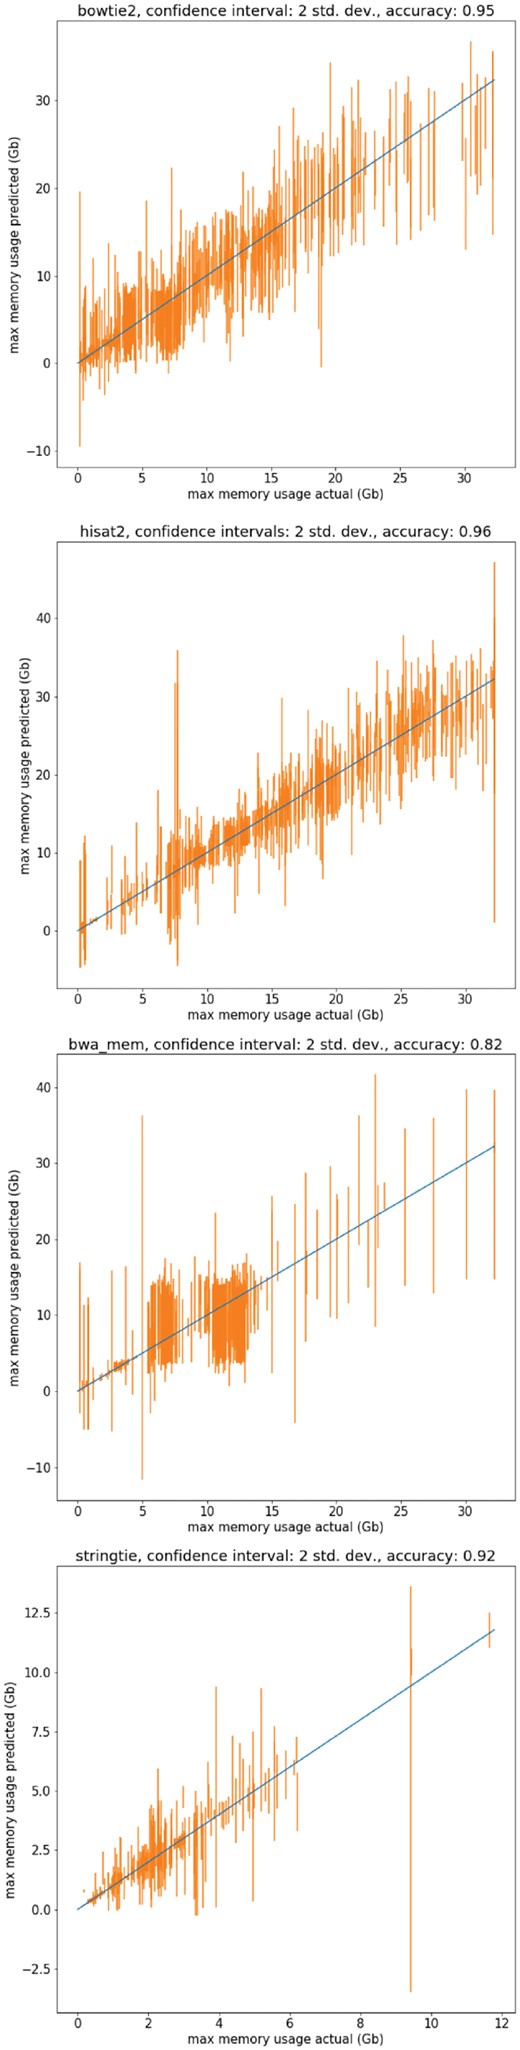 Actual maximum memory usage versus predicted memory usage of the modified random forest with confidence intervals of 2 SD. The models were trained on a random sample of a training set consisting of 0.8 jobs of the dataset, and the predictions shown are on the remaining 0.2 jobs of the dataset. The tools shown are (top) bowtie2, (middle) hisat2, (bottom) bwa mem and (respectively) stringtie